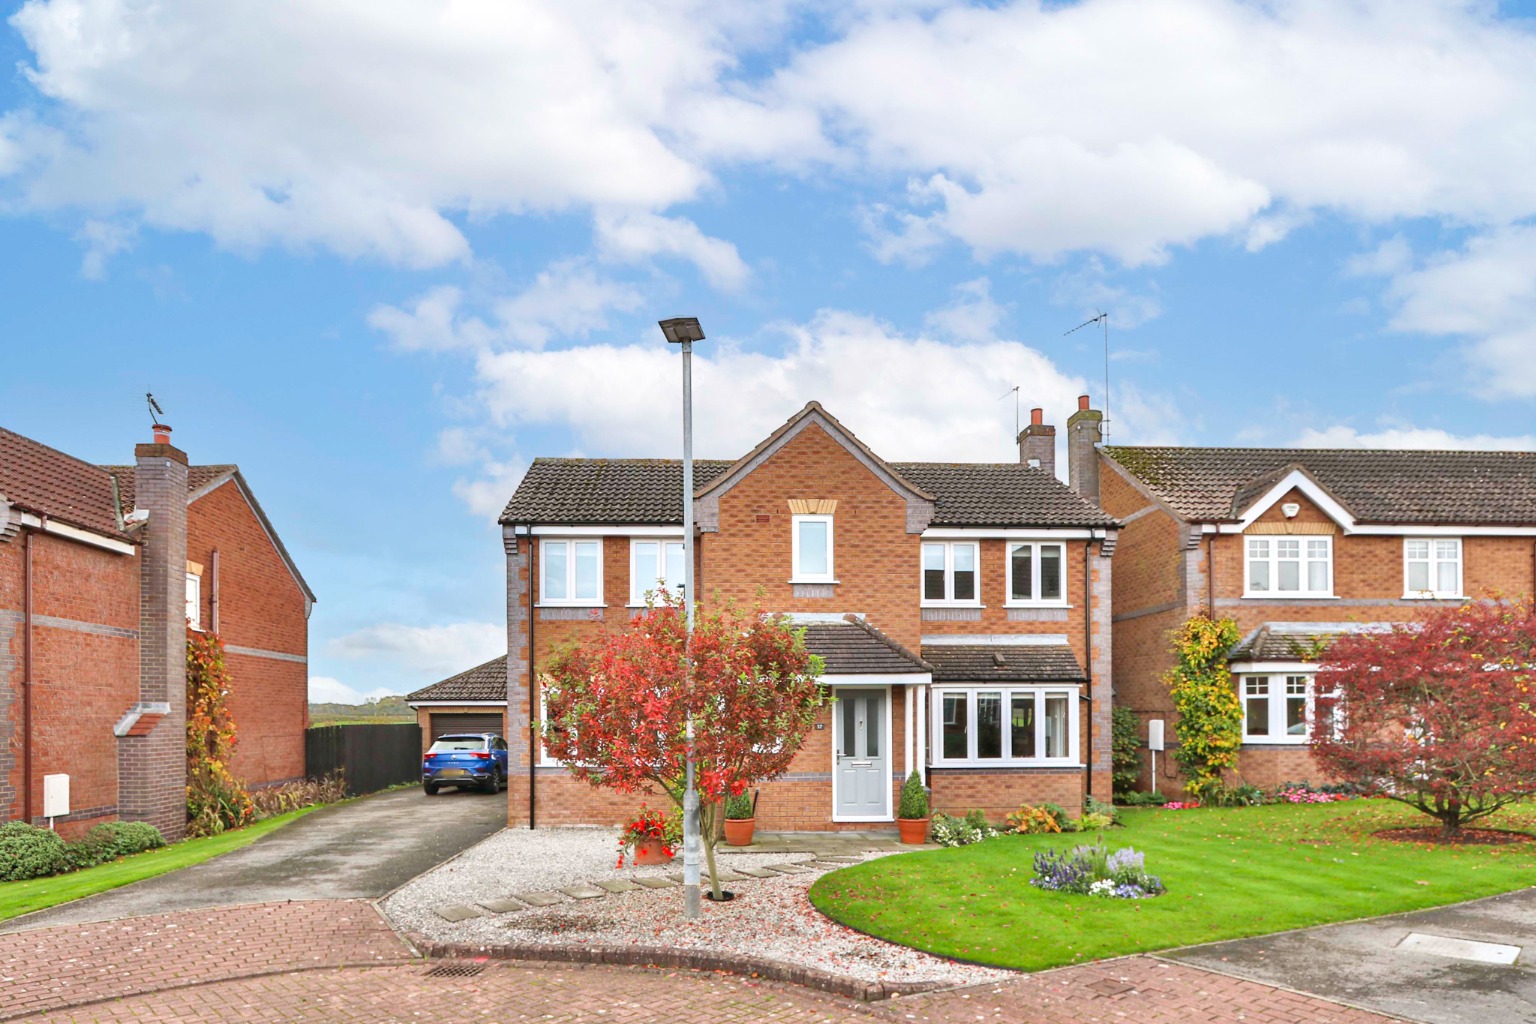 4 bed detached house for sale in Highcroft, Beverley, HU17